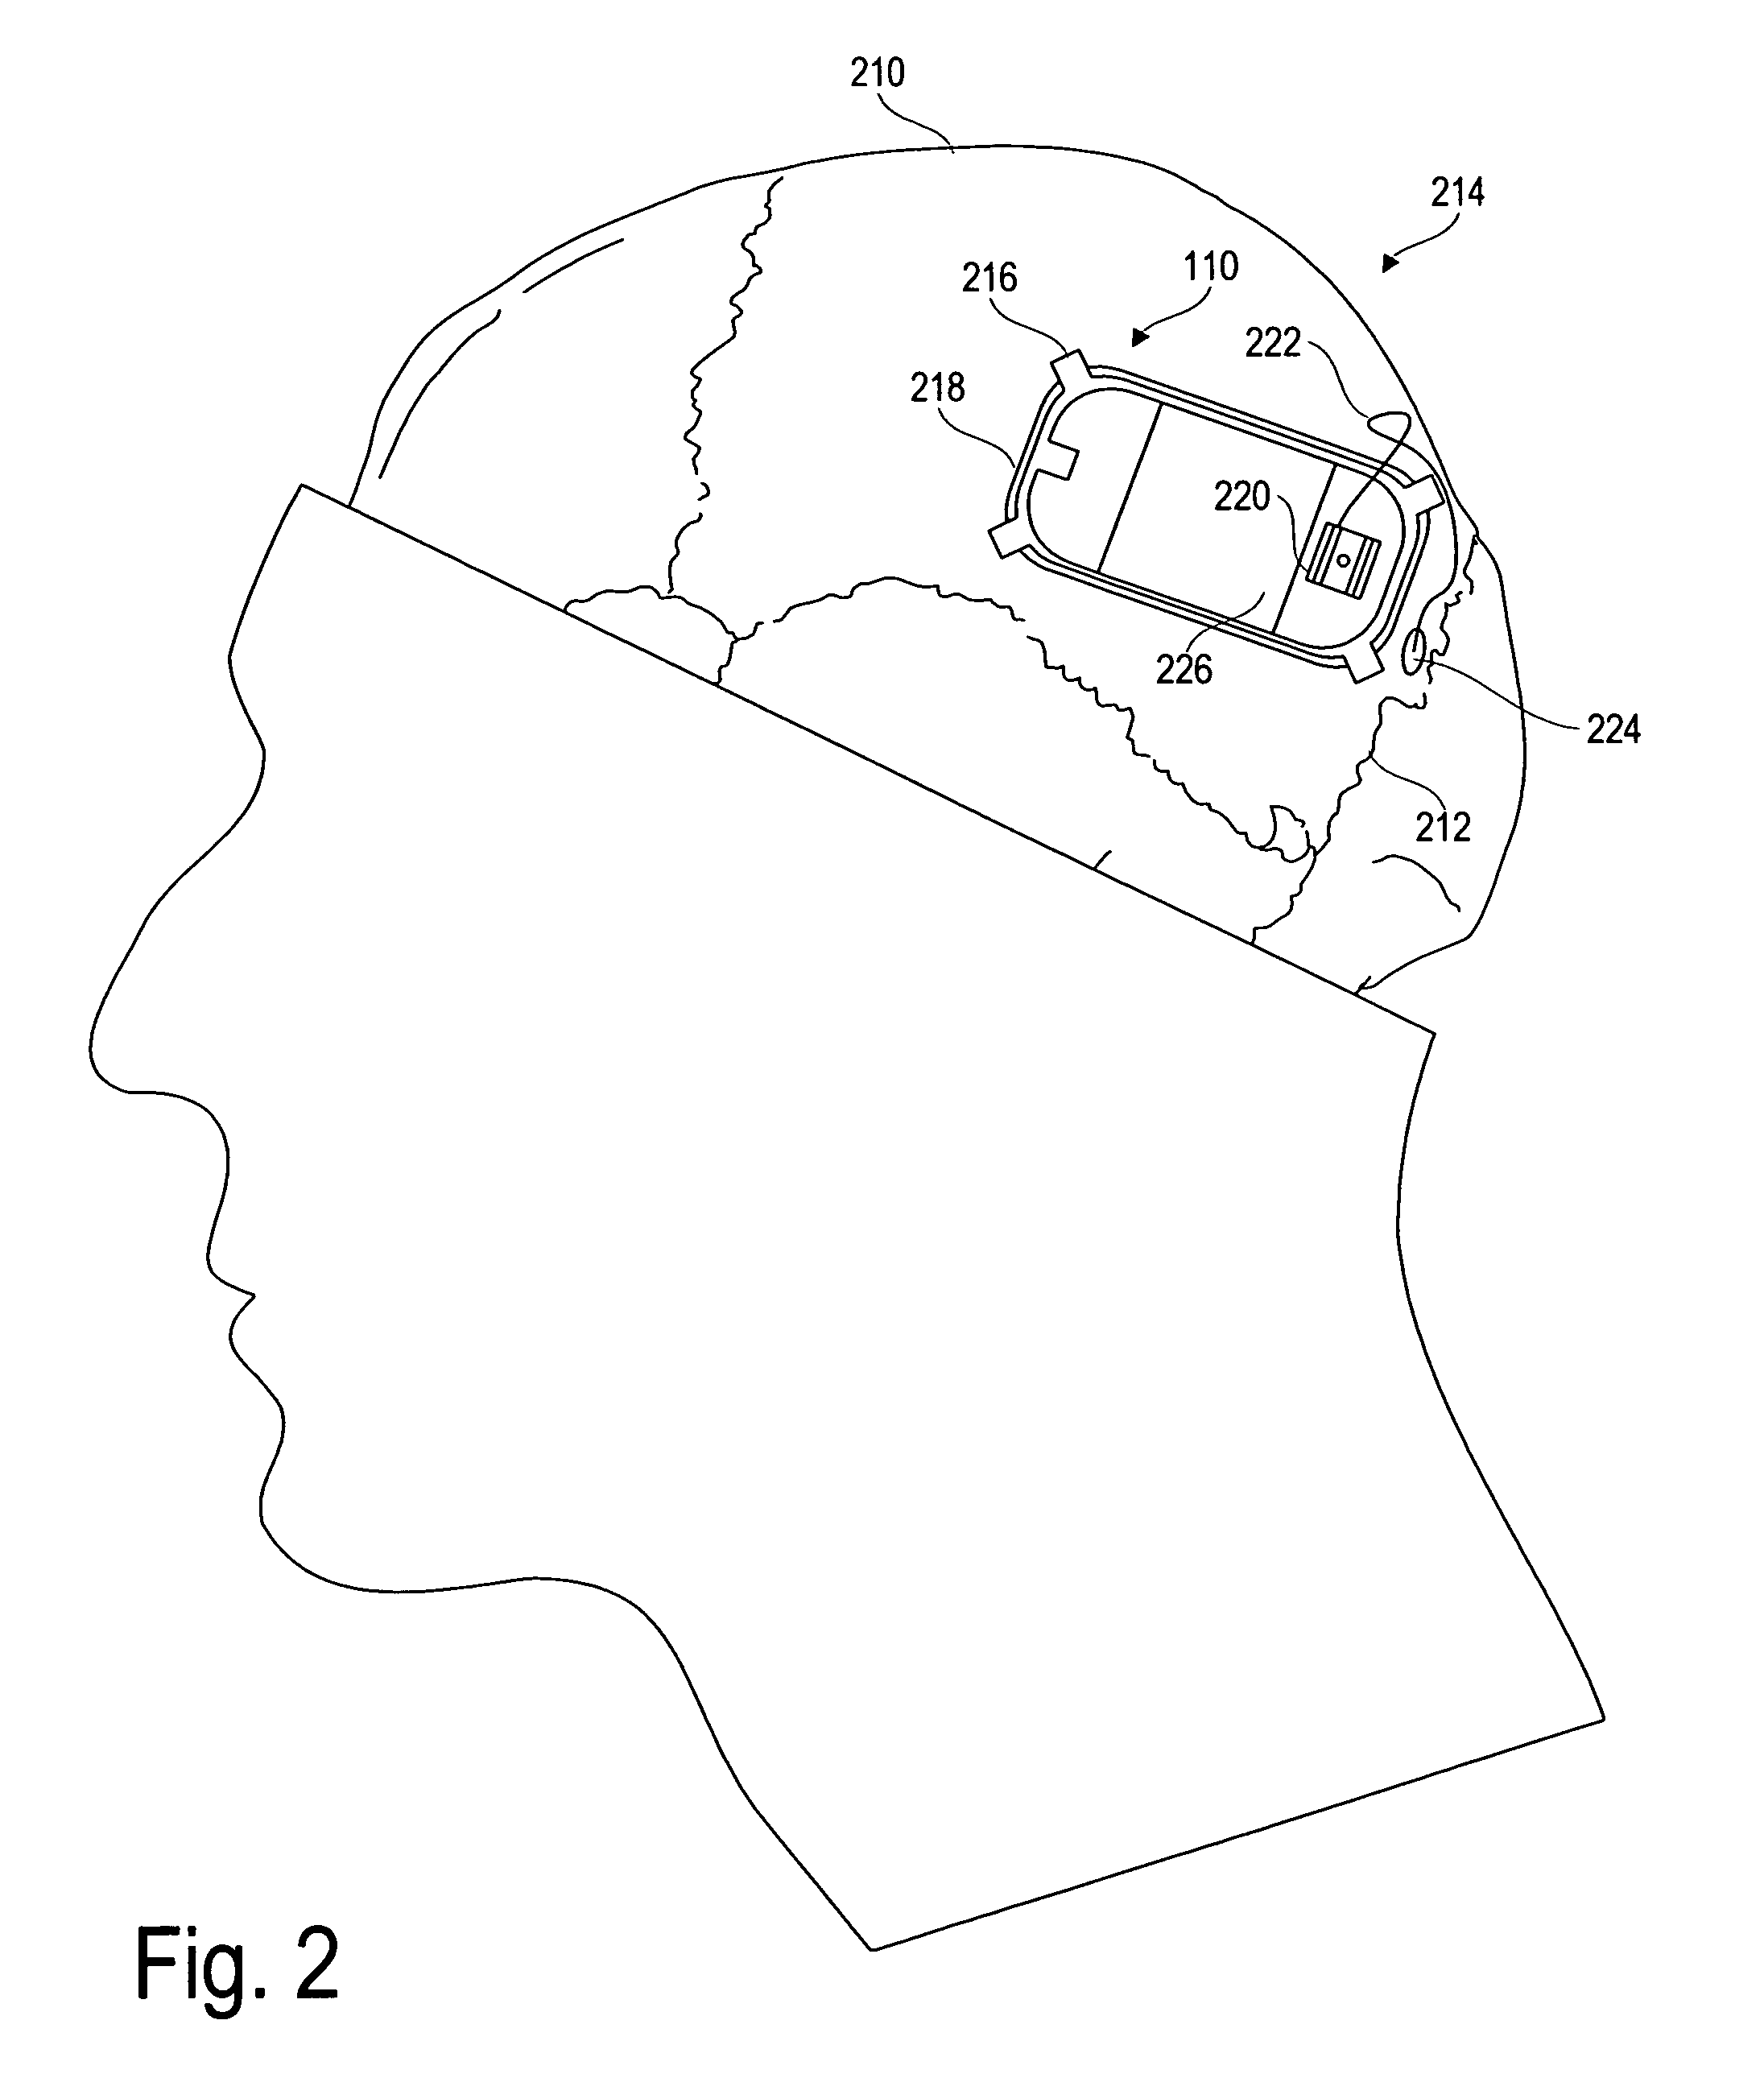 Seizure therapy and suppression using an implantable device